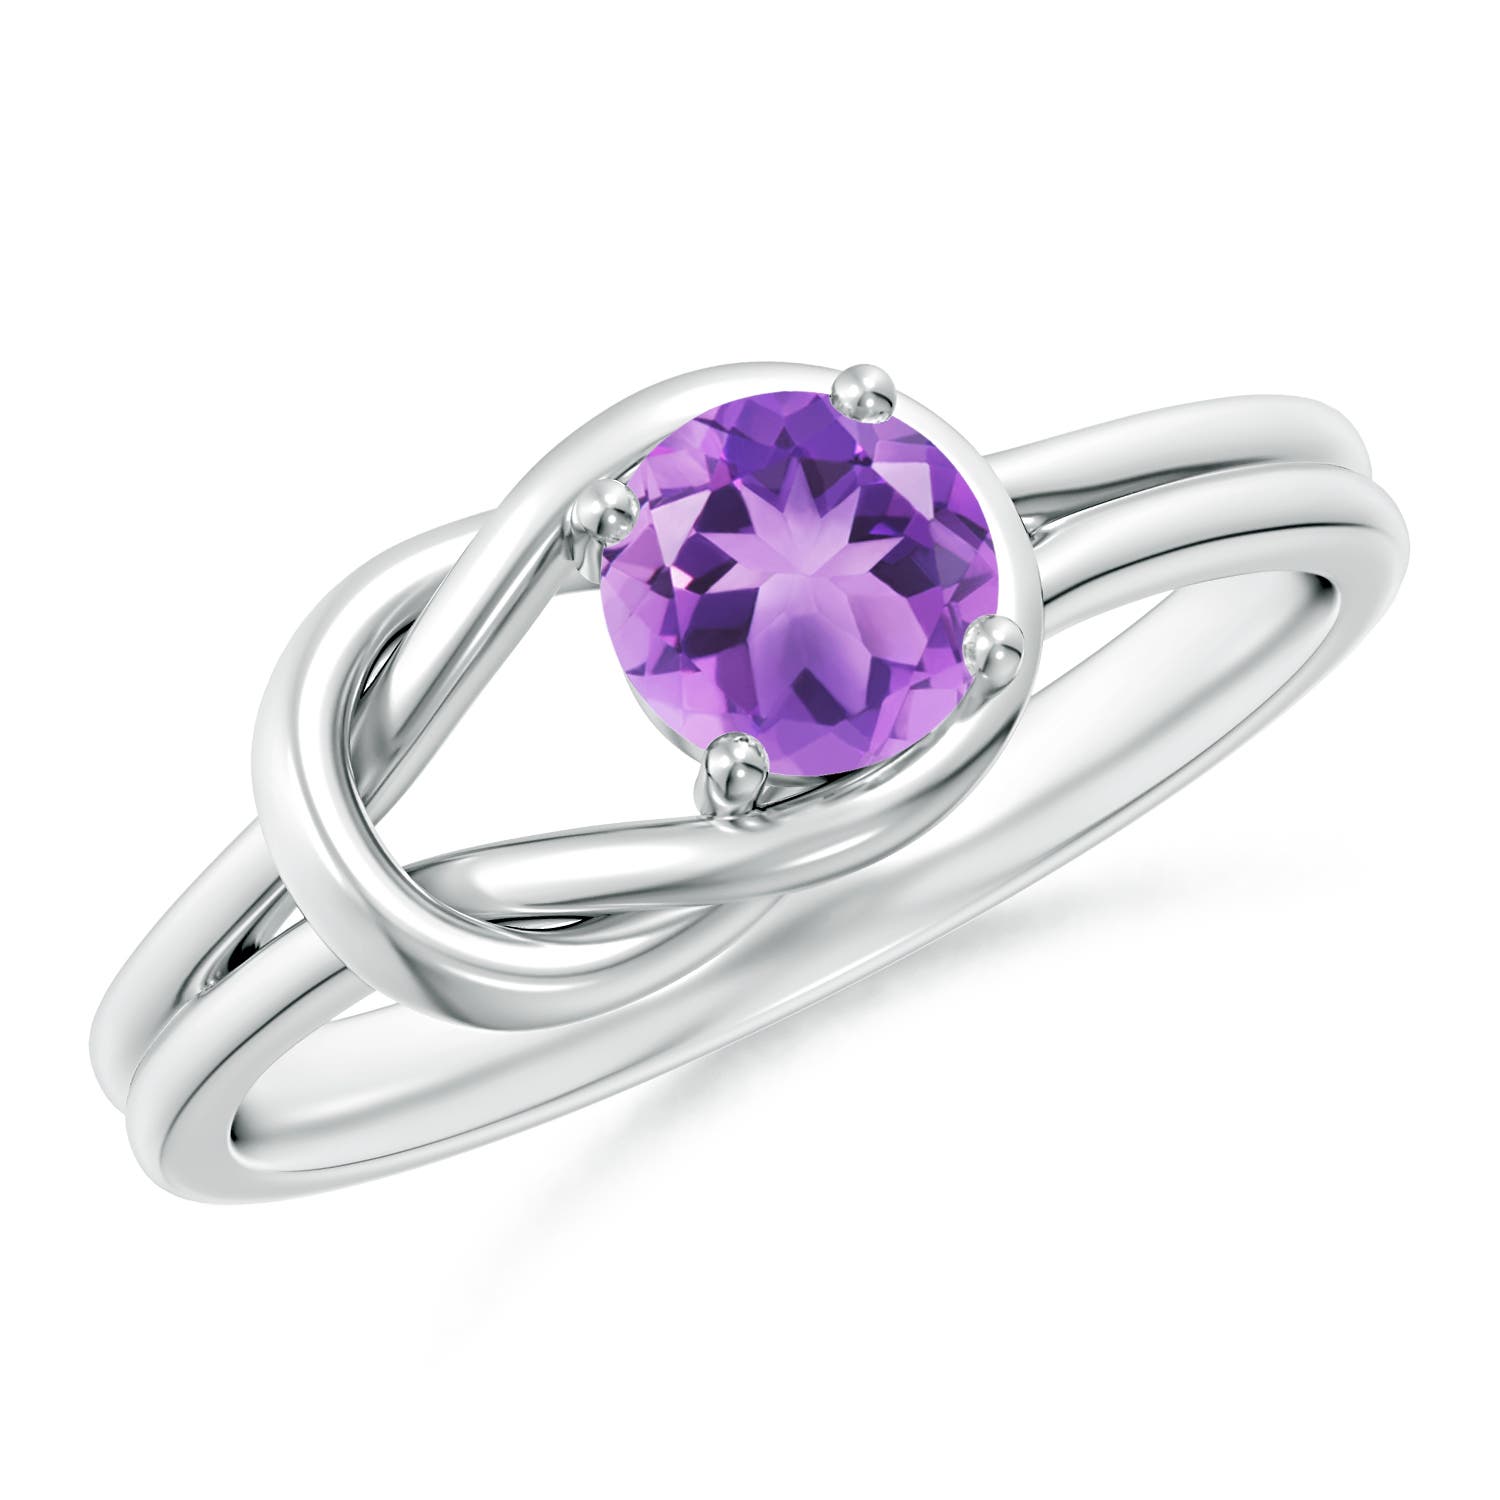 A - Amethyst / 0.45 CT / 14 KT White Gold